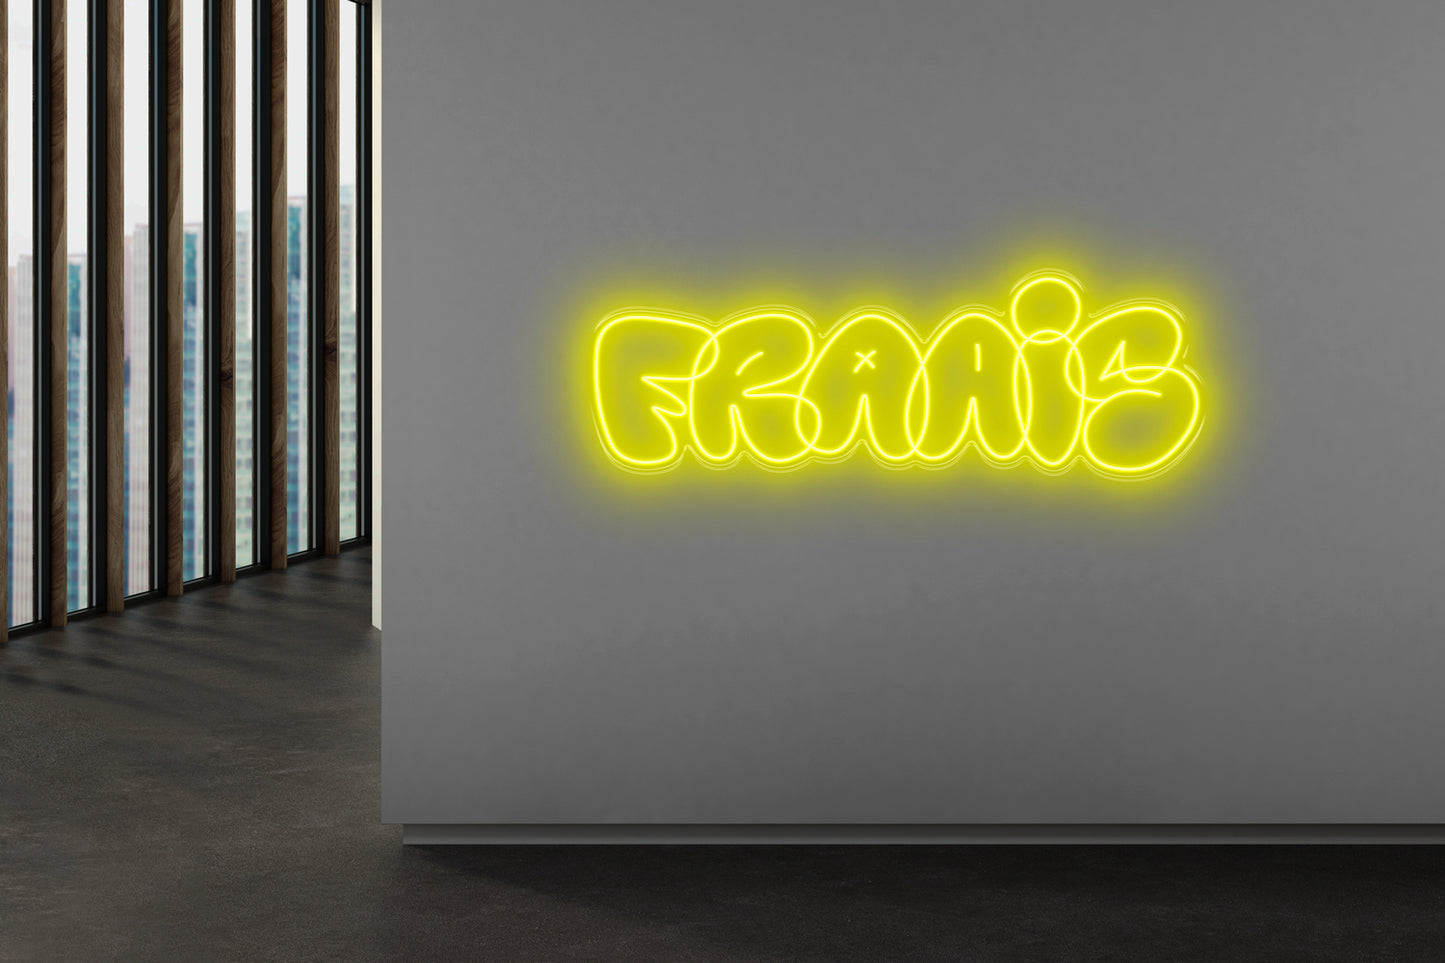 PowerLED Neon Sign (Indoor) - Name:Fraais